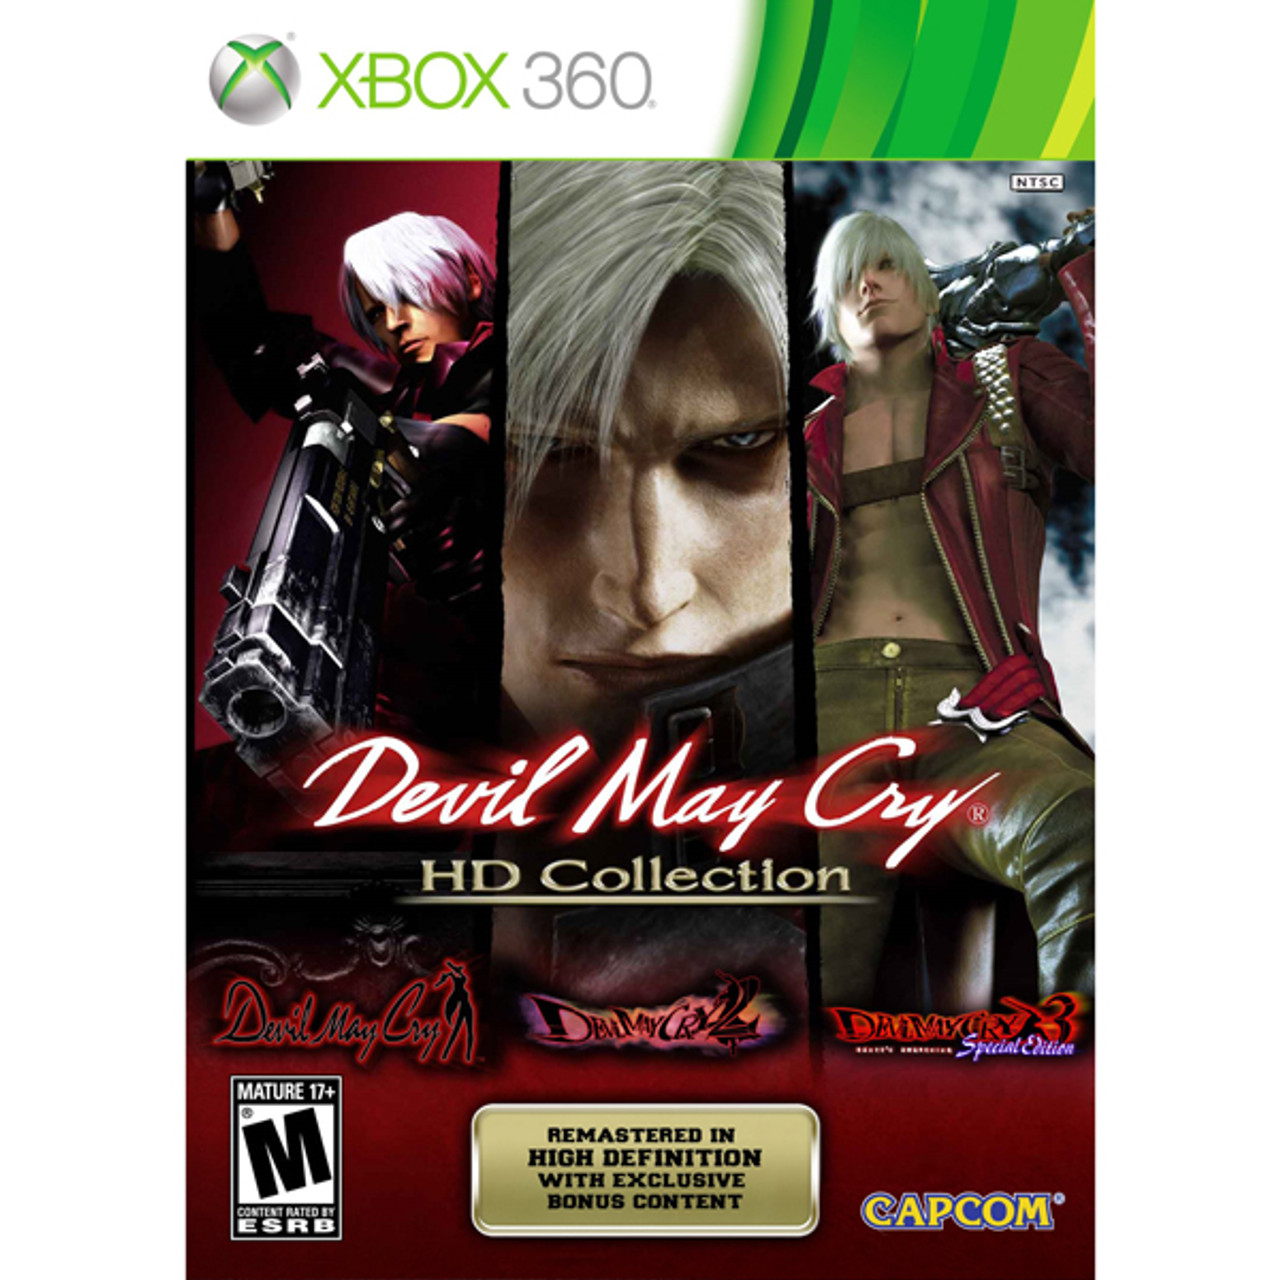 Devil May Cry 4 Special Edition at the best price